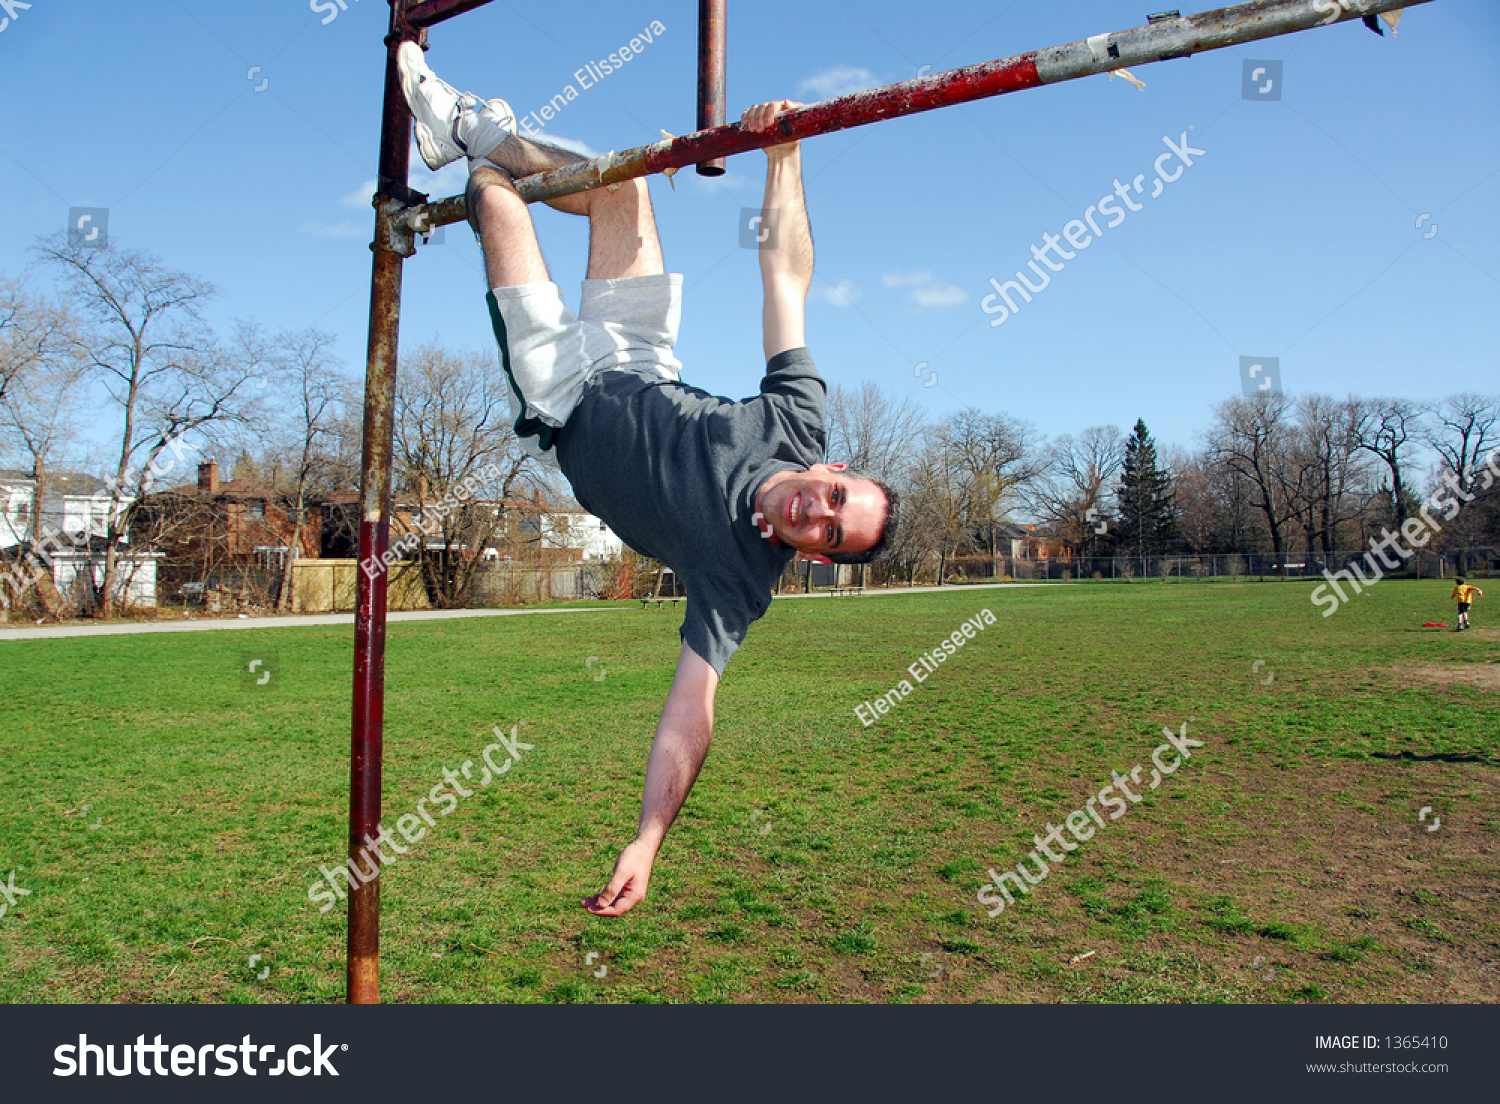 Happy Man Hanging Upside Down From A Soccer Gate Stock Photo 1365410 ...